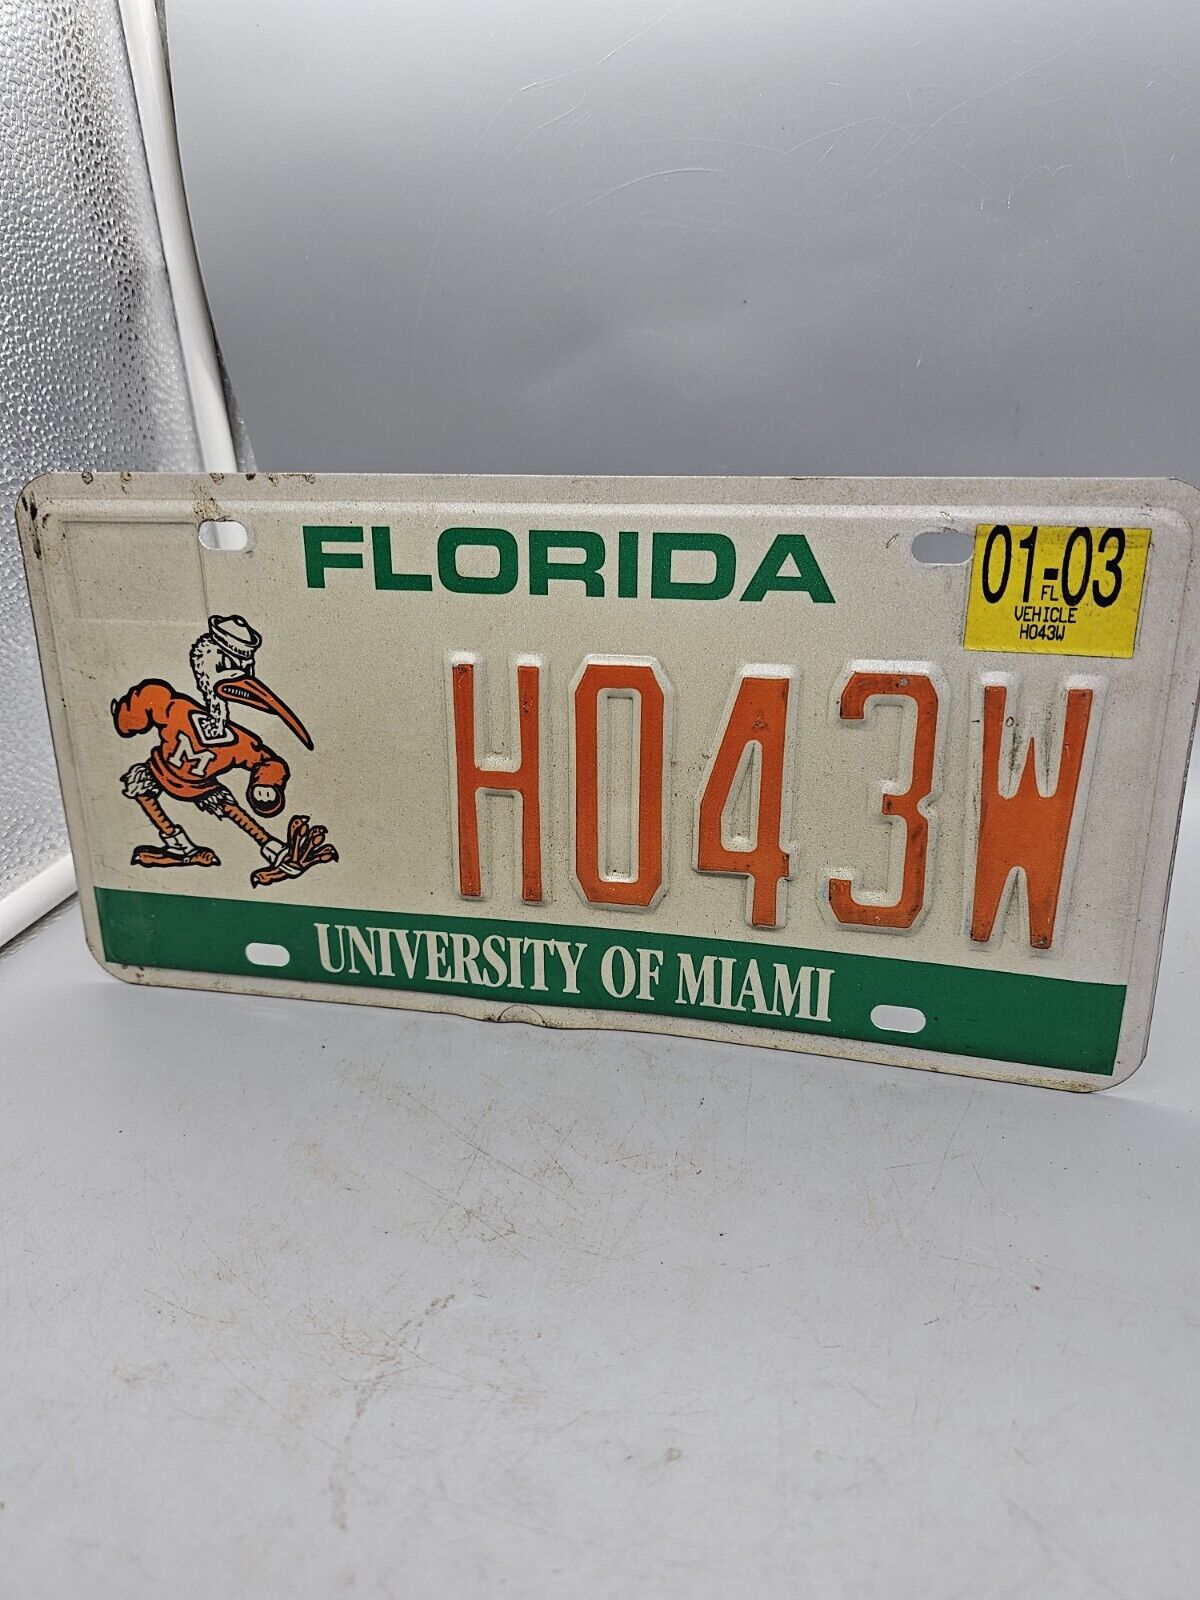 2003 Florida University of Miami License Plate Tag Specialty